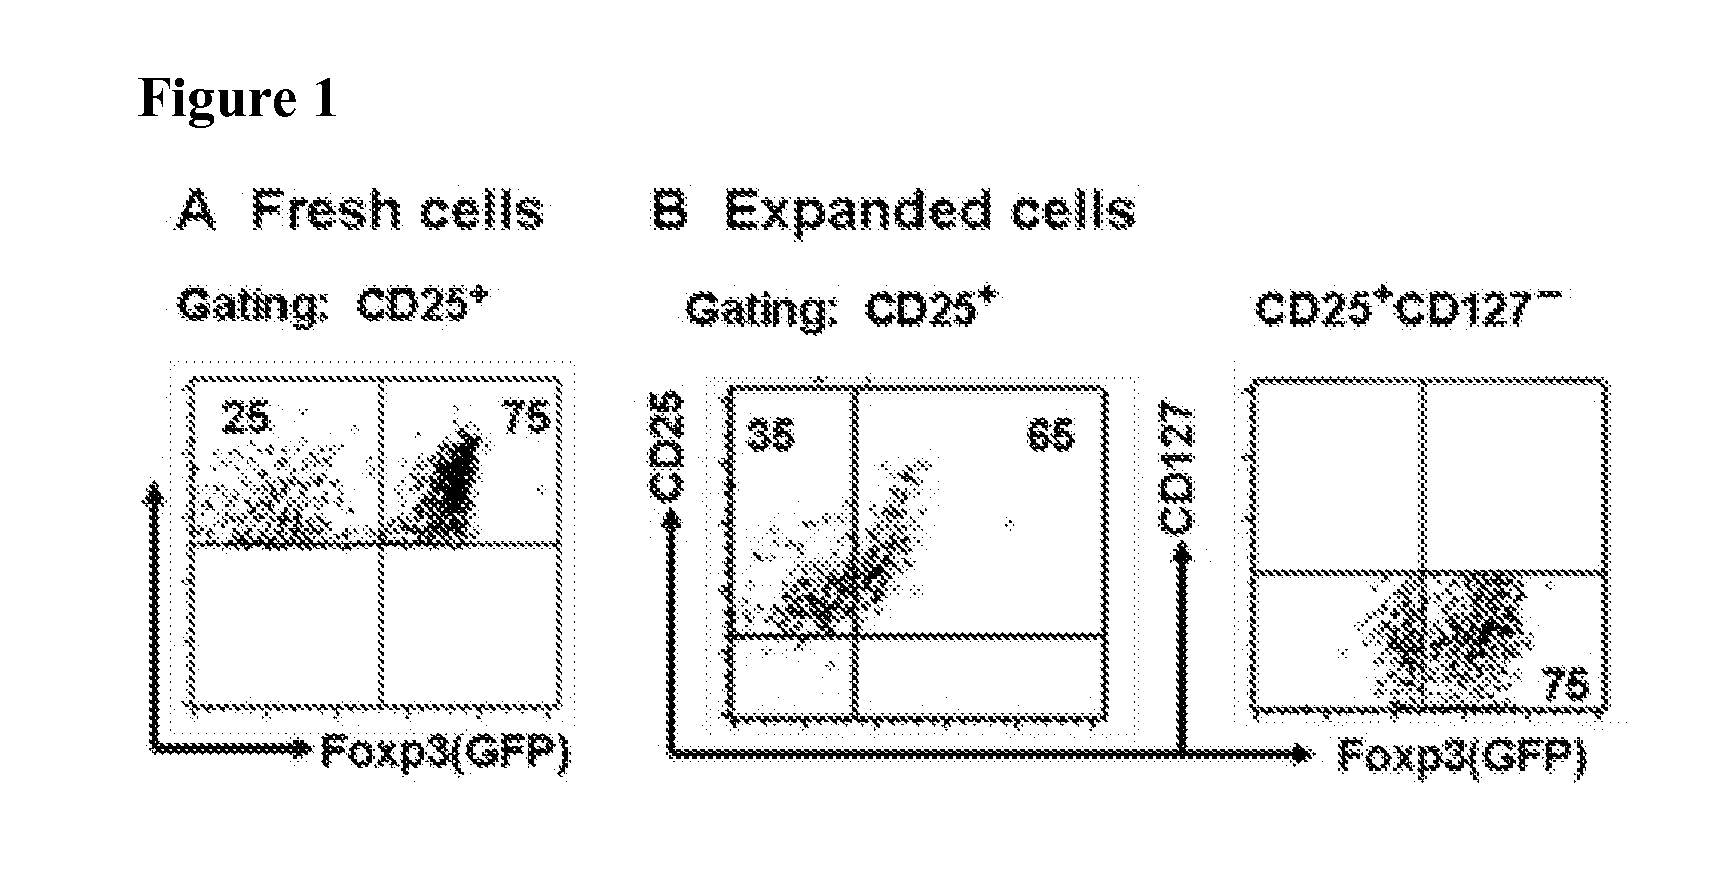 Methods for the enrichment of viable foxp3+ cells and uses thereof